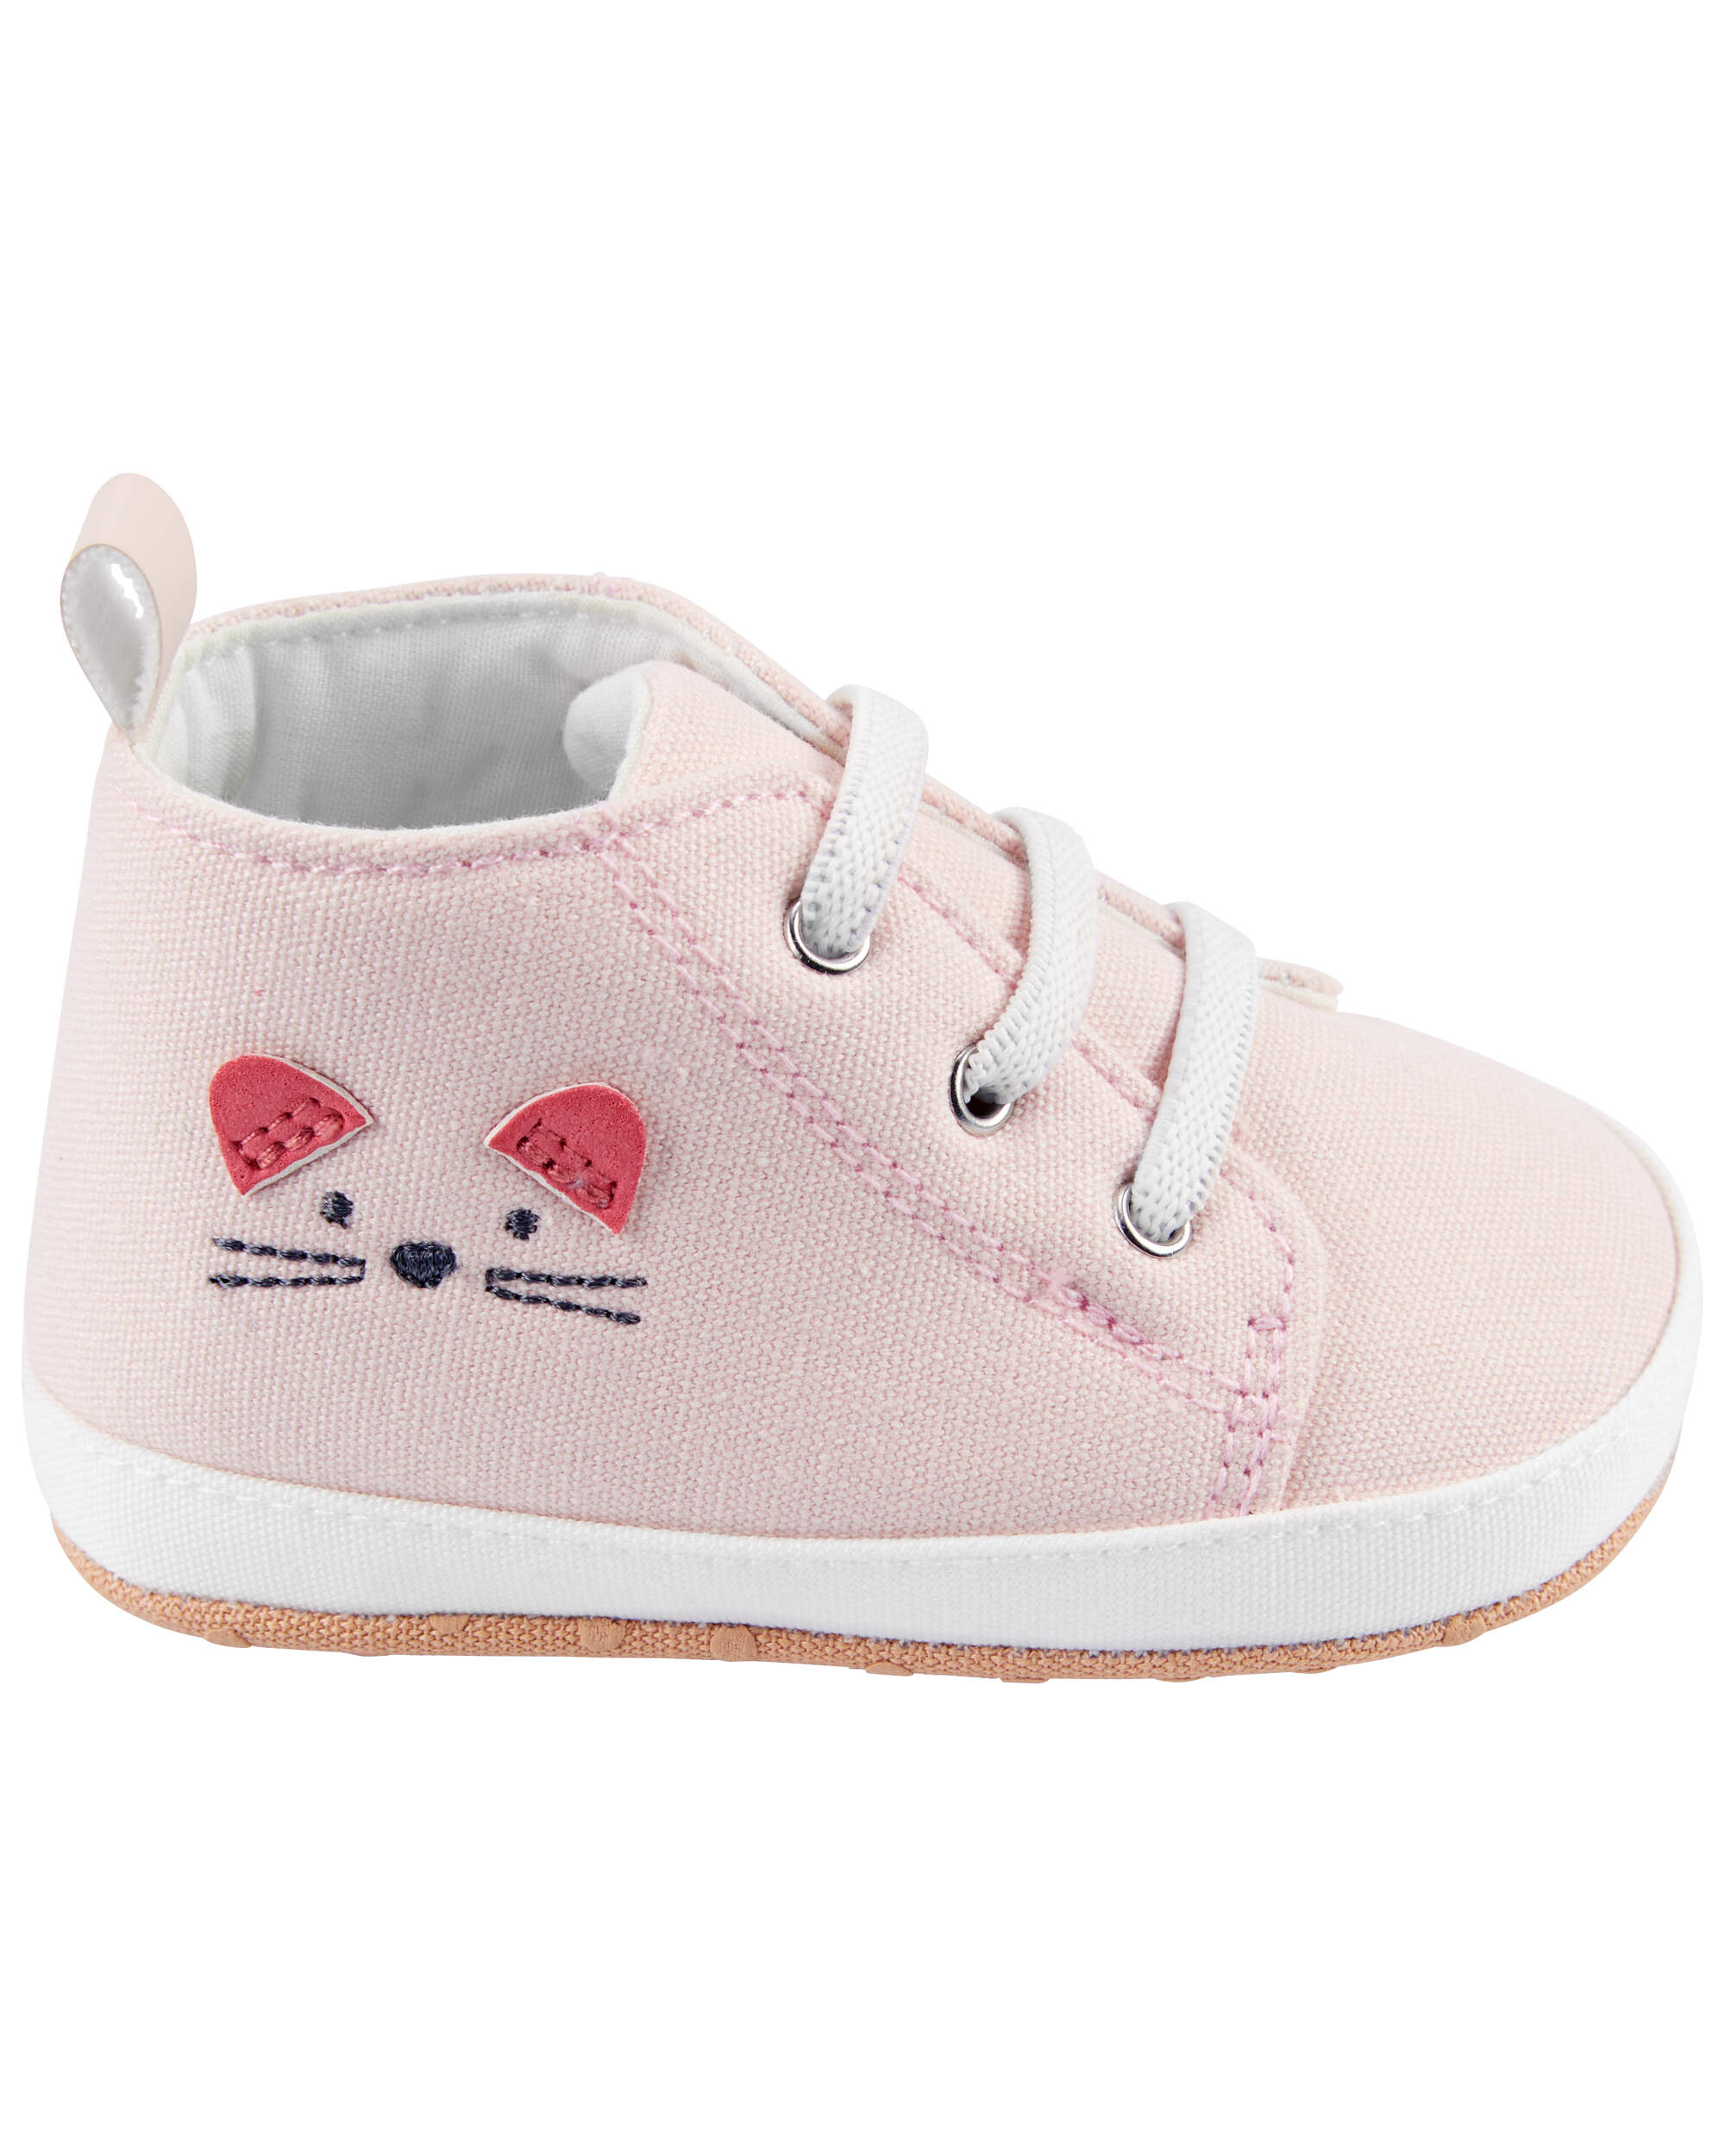 Baby Cat High Top Sneaker Shoes